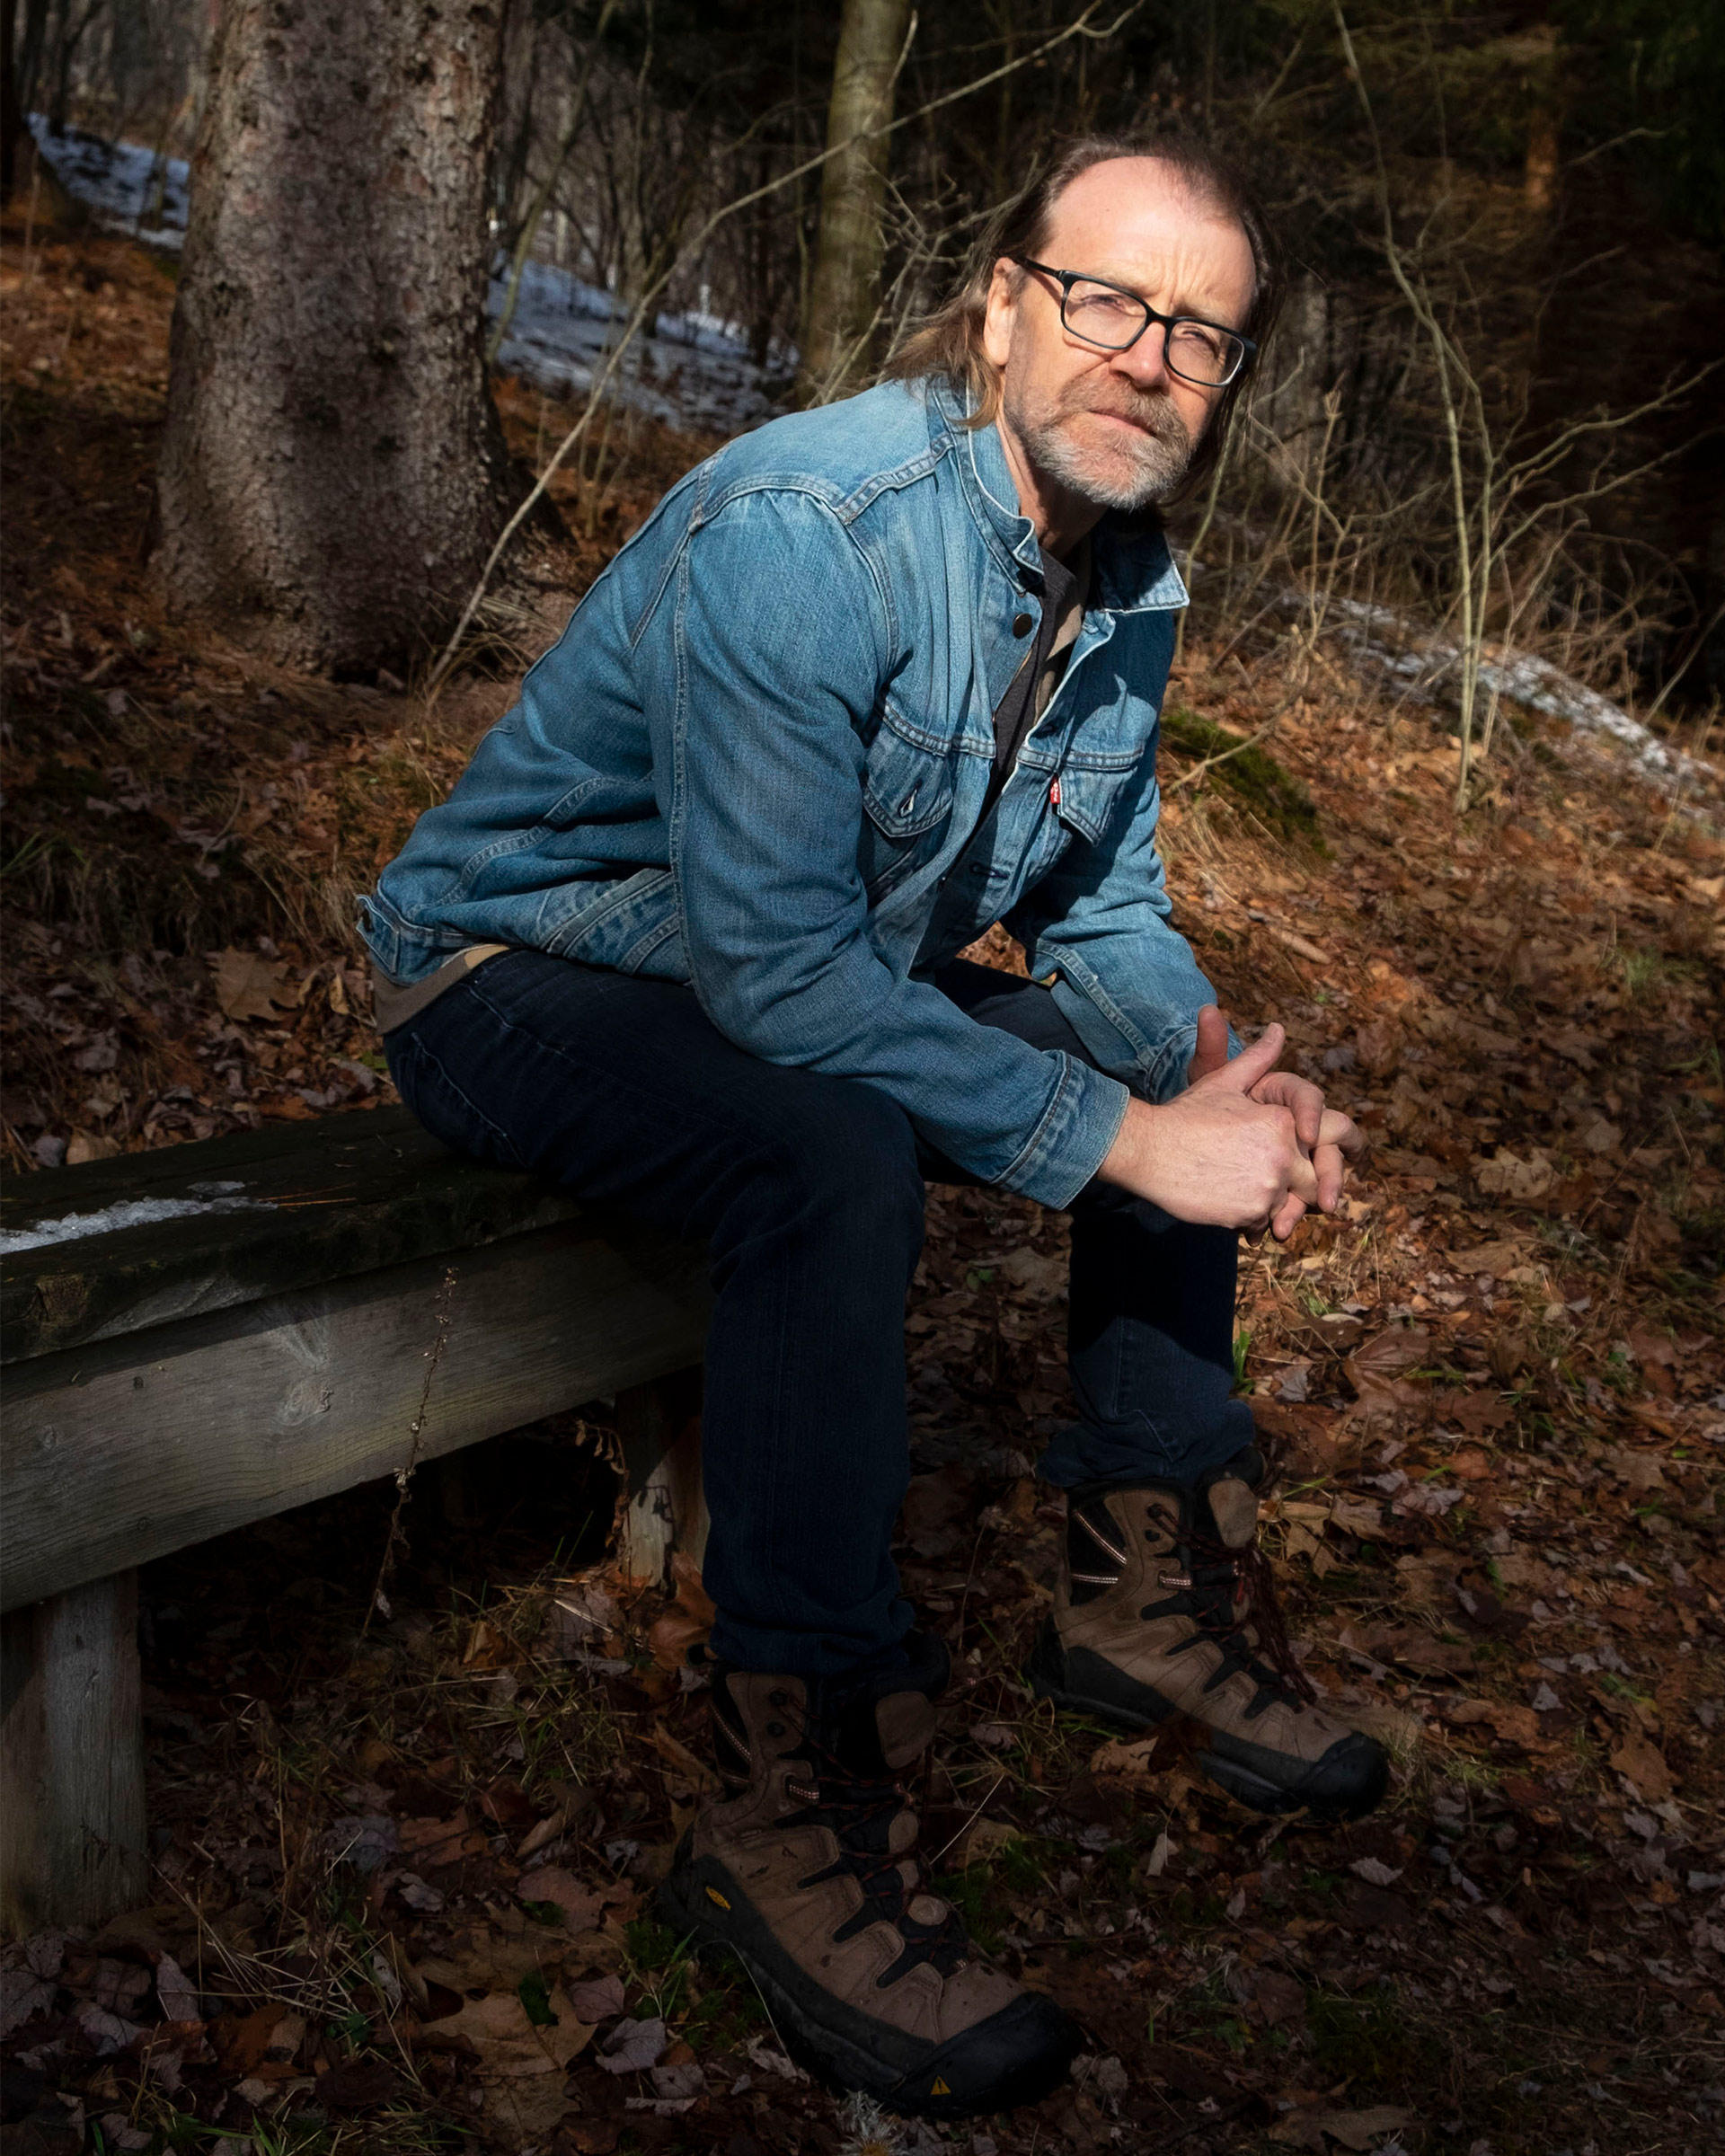 Author George Saunders photographed by his daughter at home in New York State.